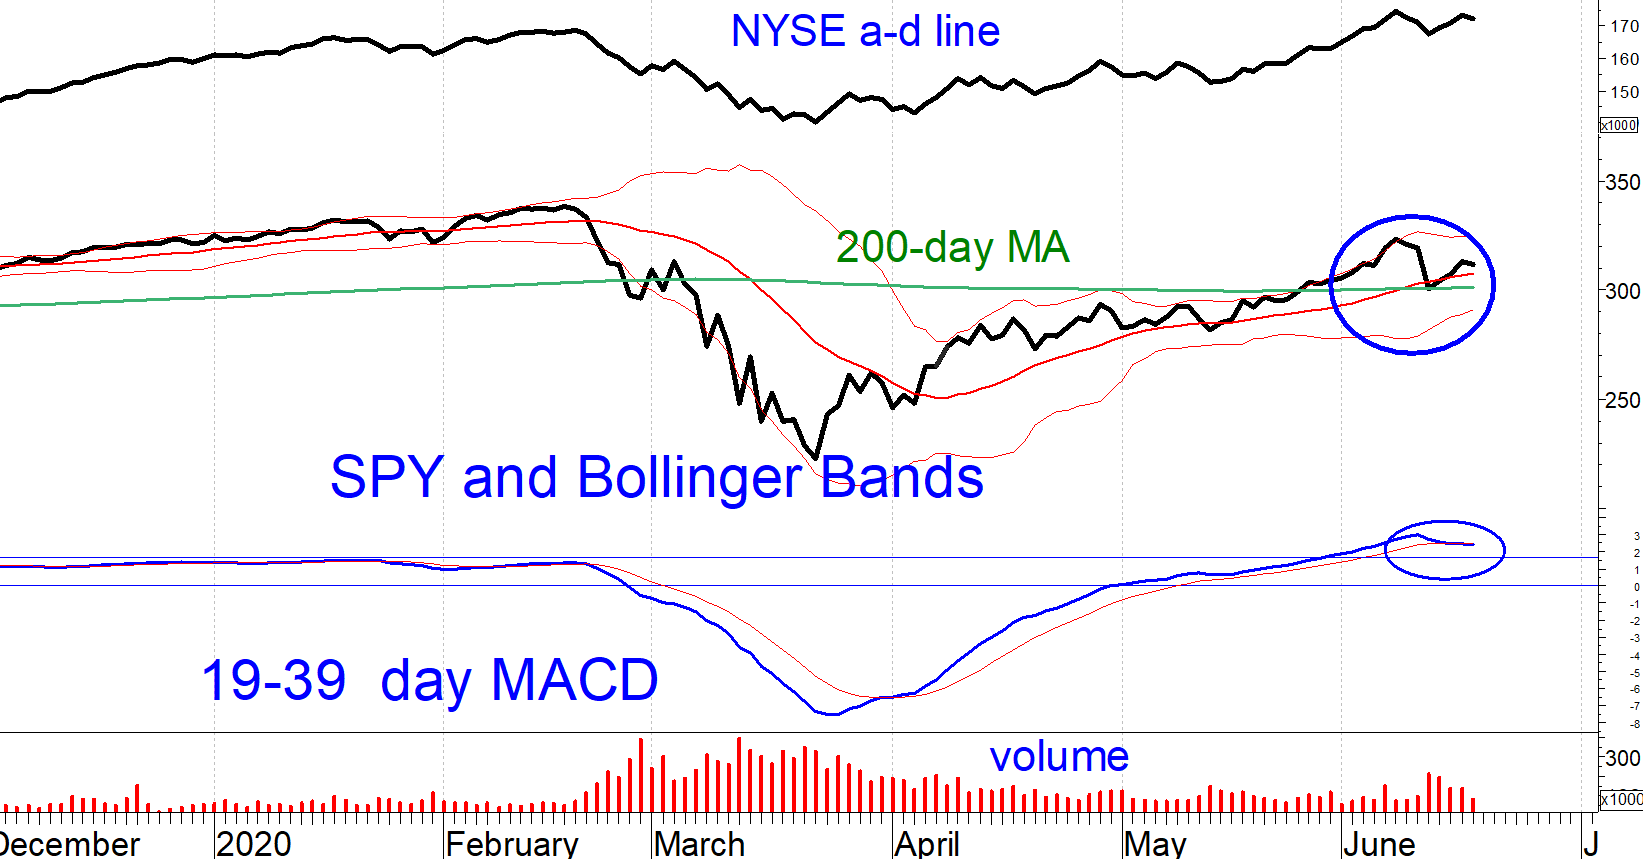 SPY and Bollinger bands chart